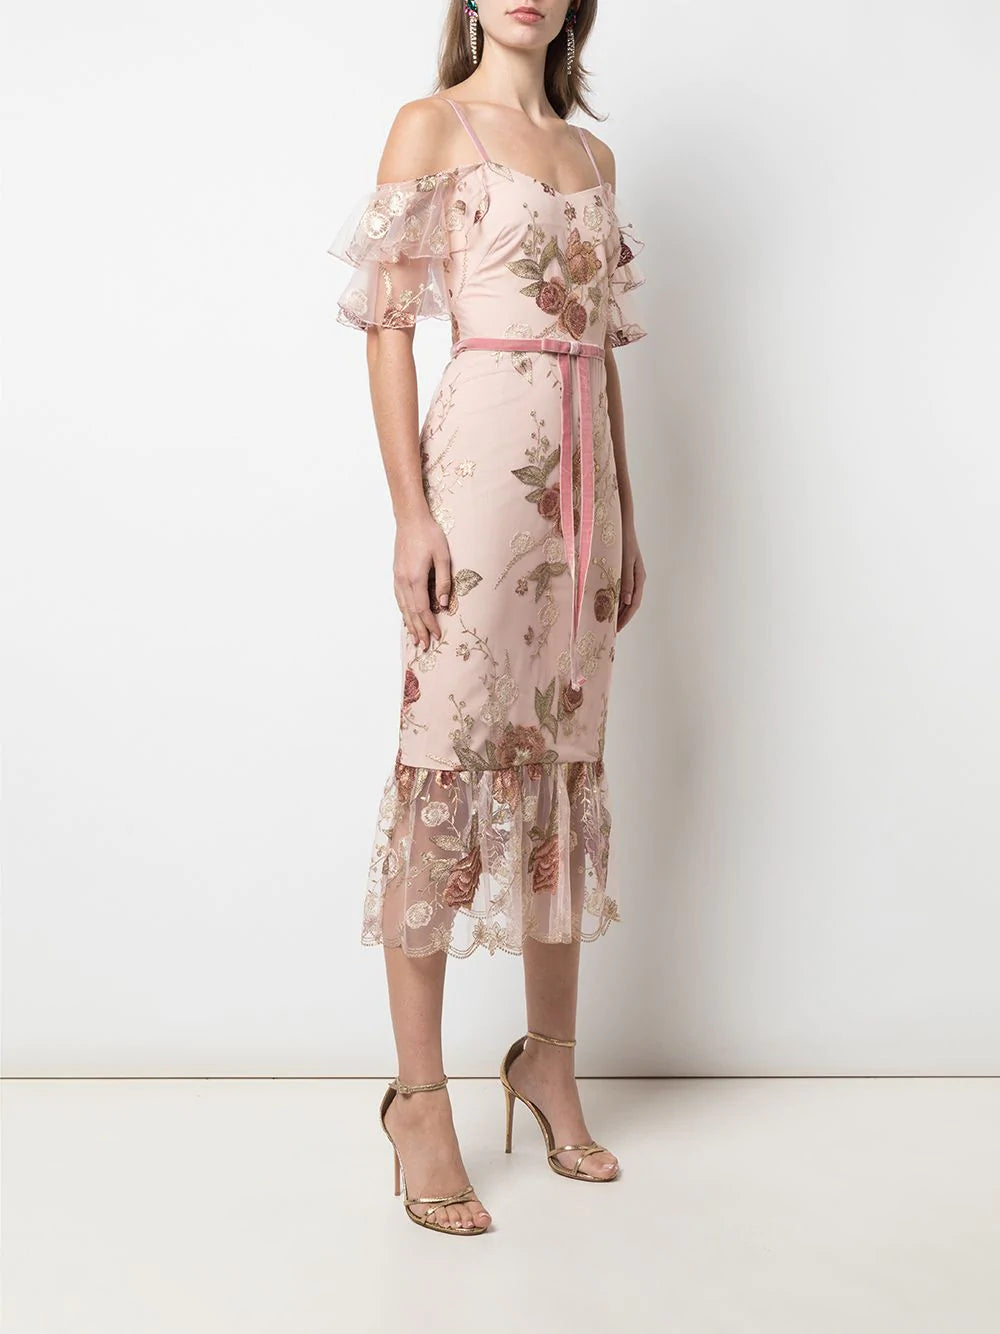 Floral Embroidered Cocktail Dress – Marchesa